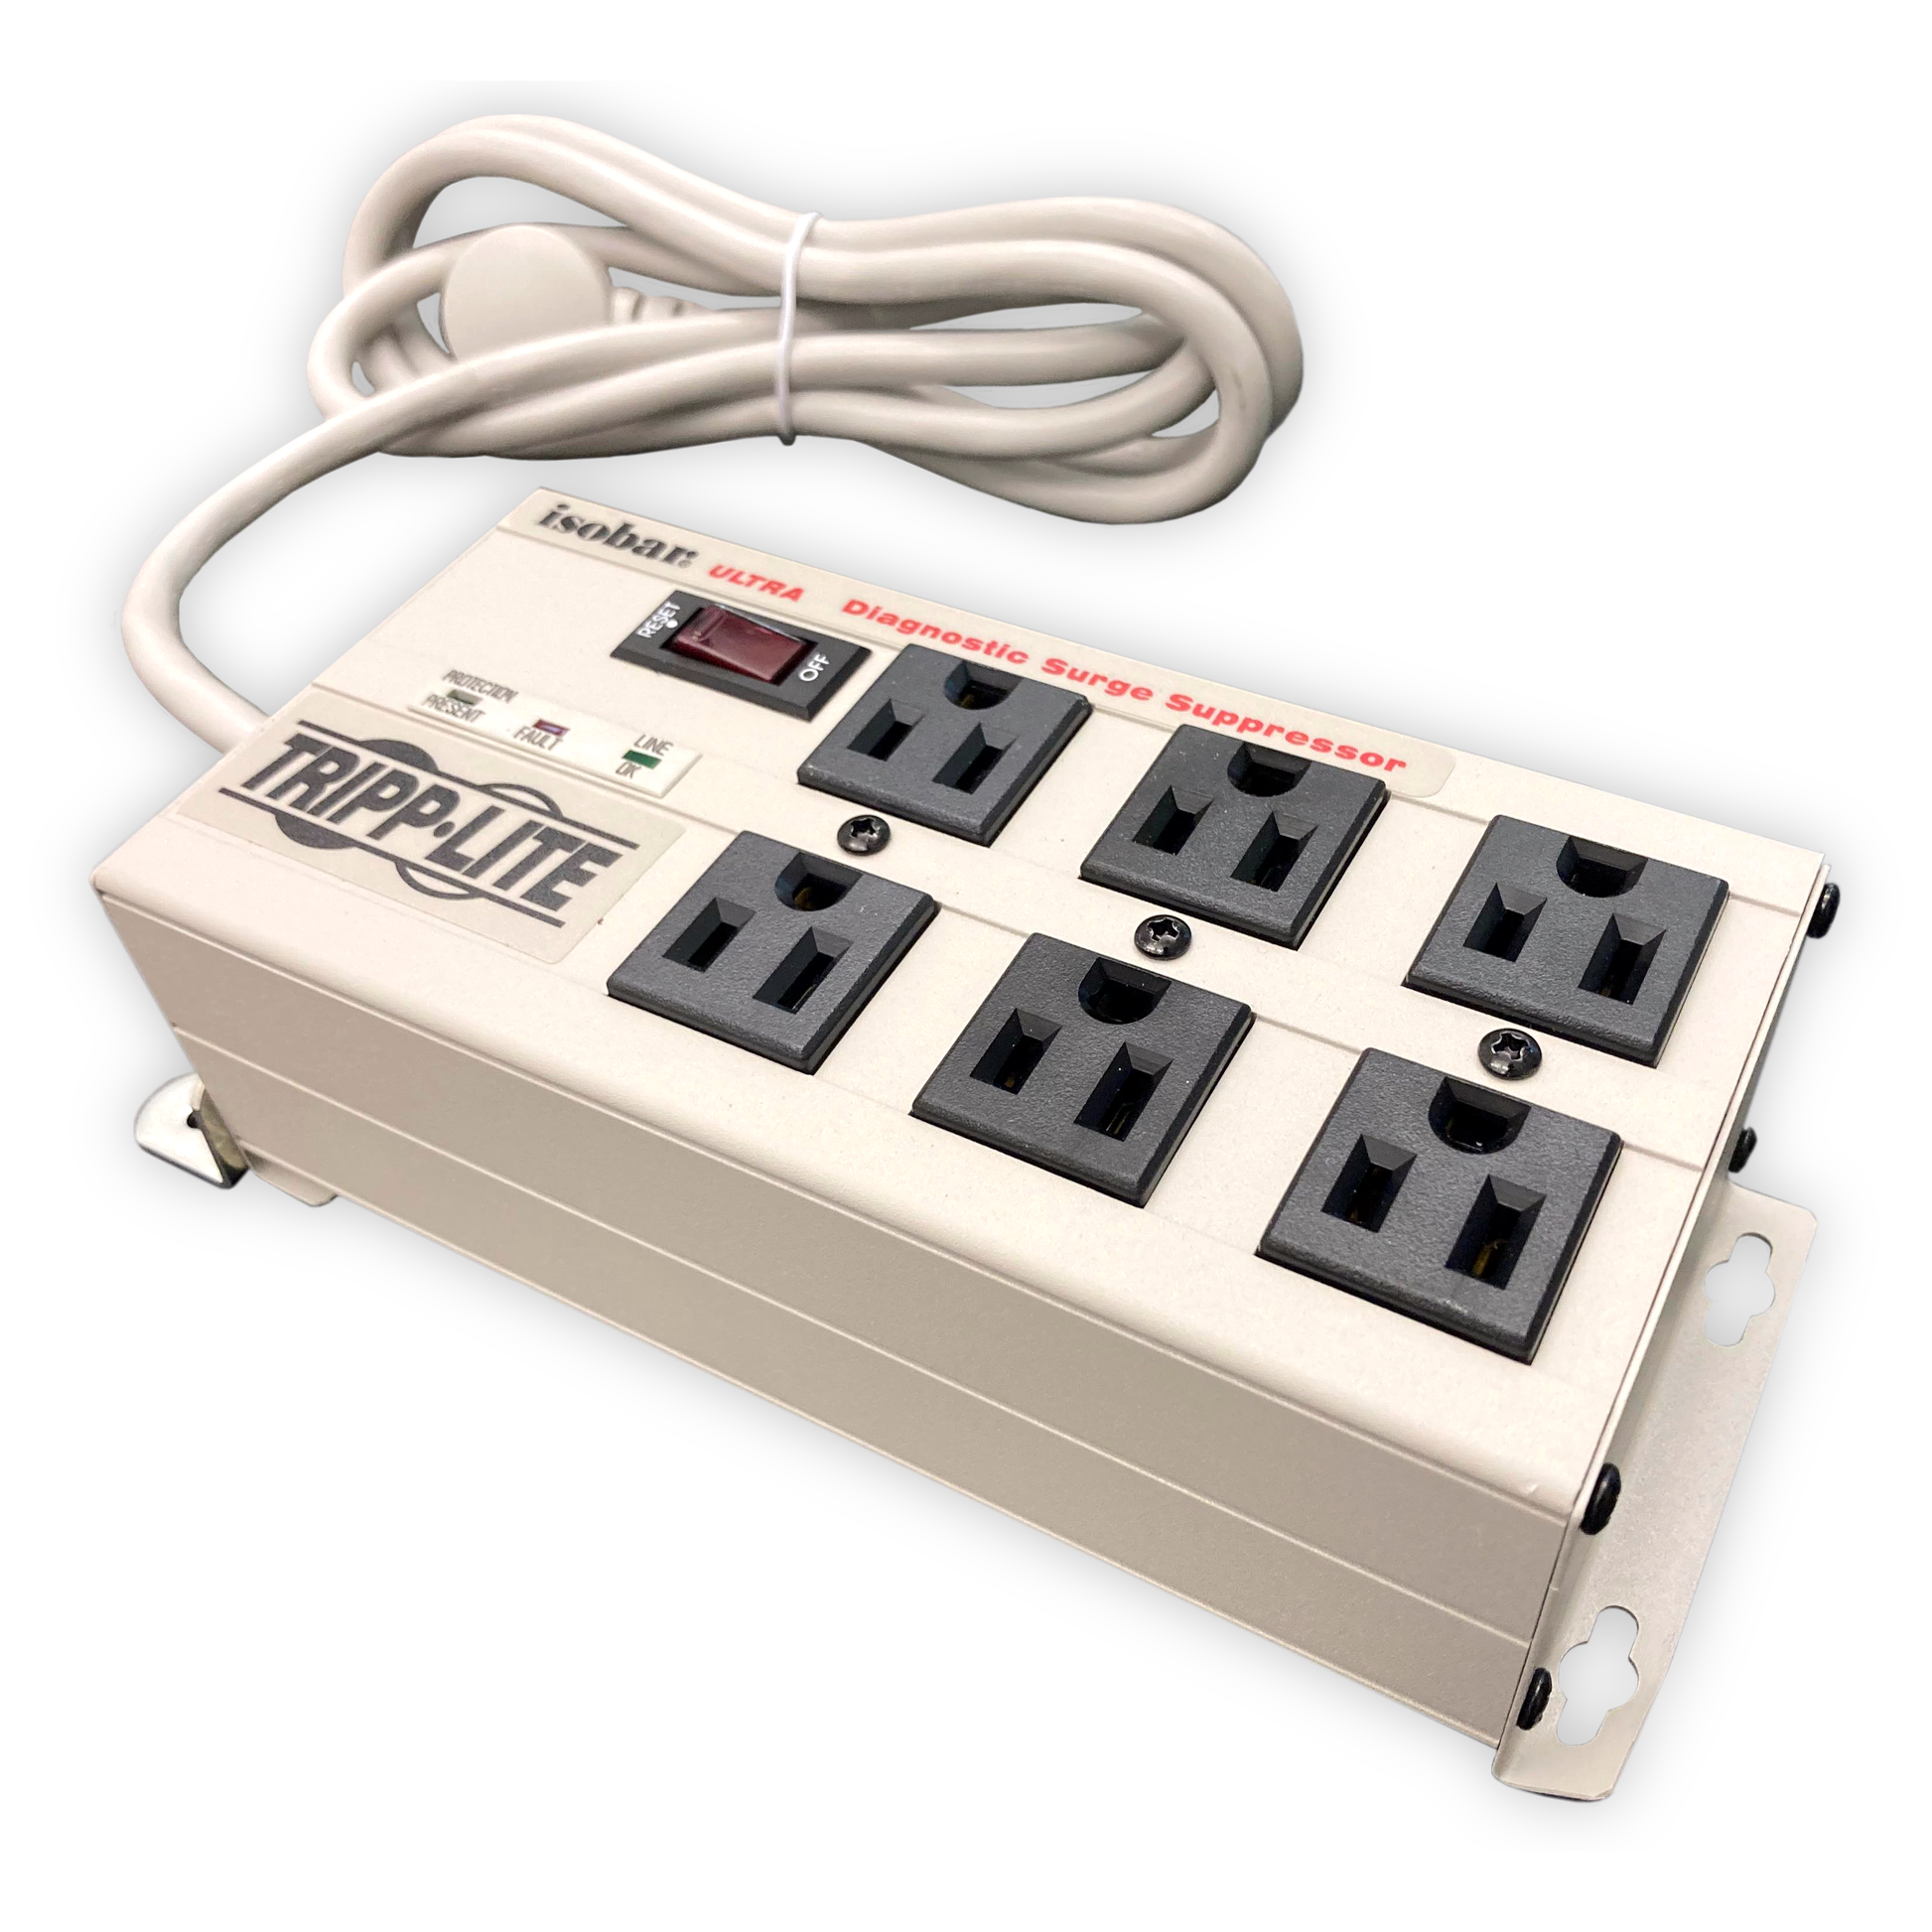 Premium protection for essential network workstations, telecom systems, point-of-sale equipment and audio/video systems, the Isobar 6-Outlet Surge Protector features a network-grade surge protection rating of 3840 joules to defend your sensitive electronics against even the strongest surges and spikes.